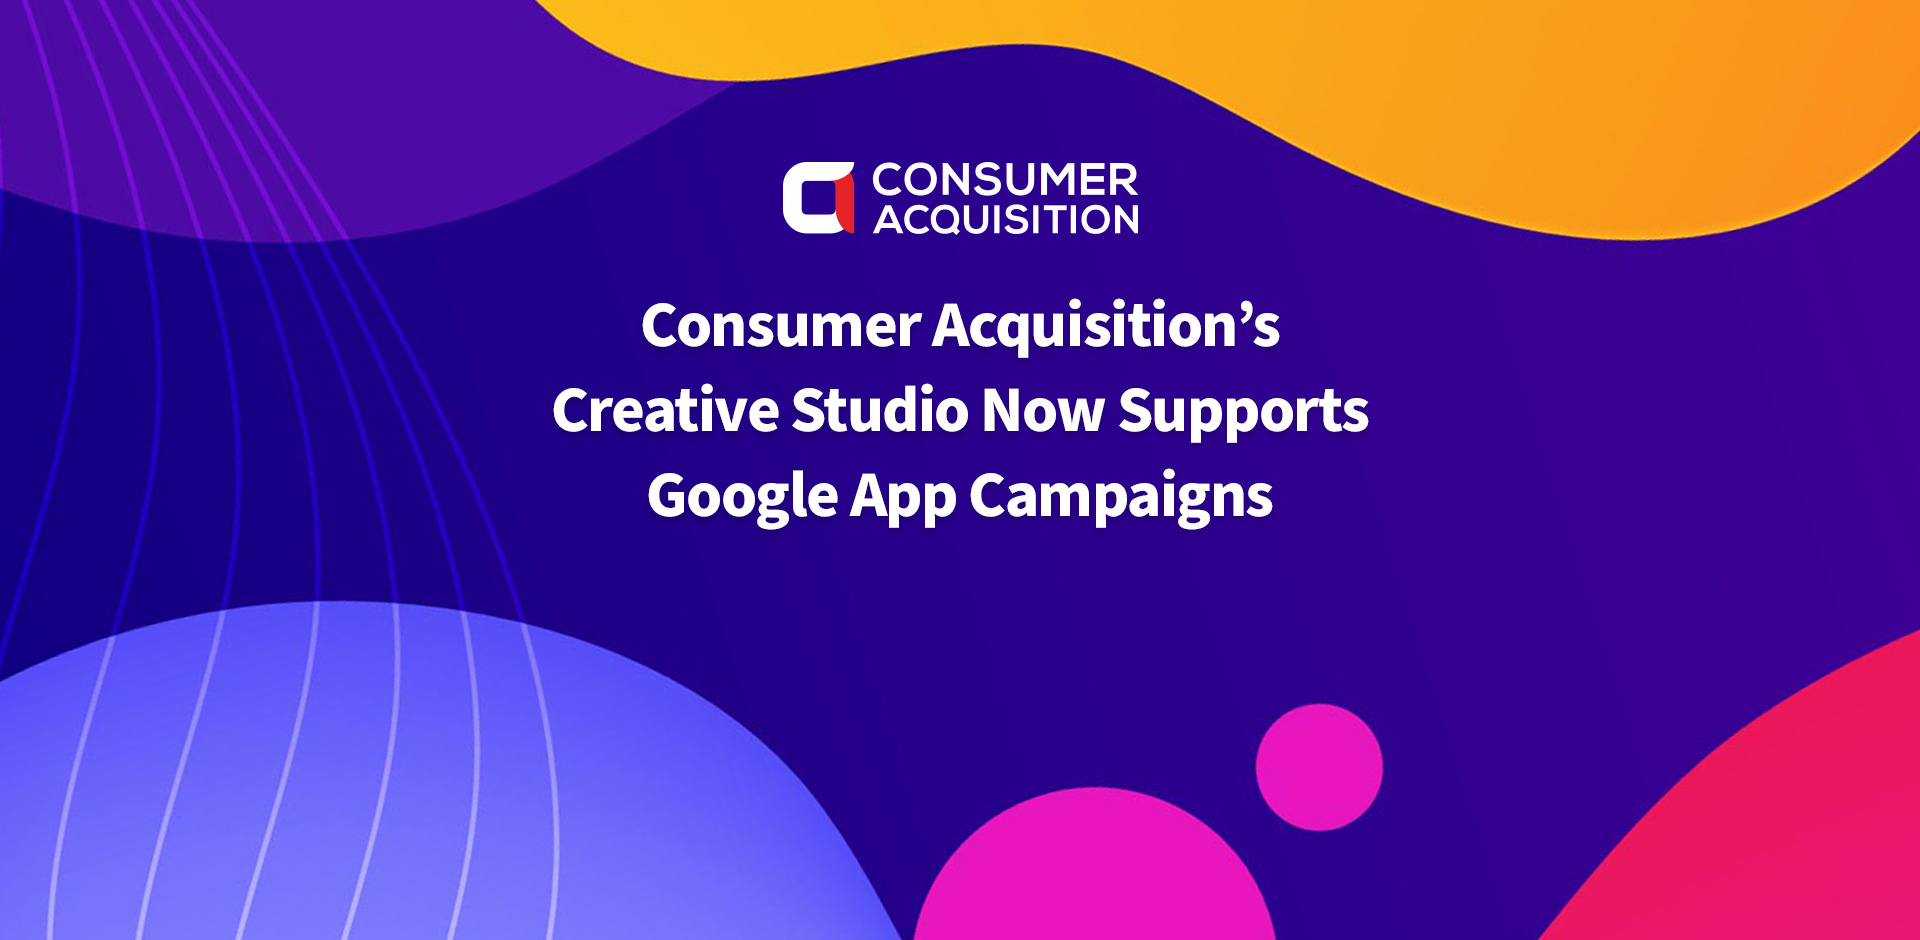 Consumer Acquisition’s Creative Studio Now Supports Google App Campaigns.